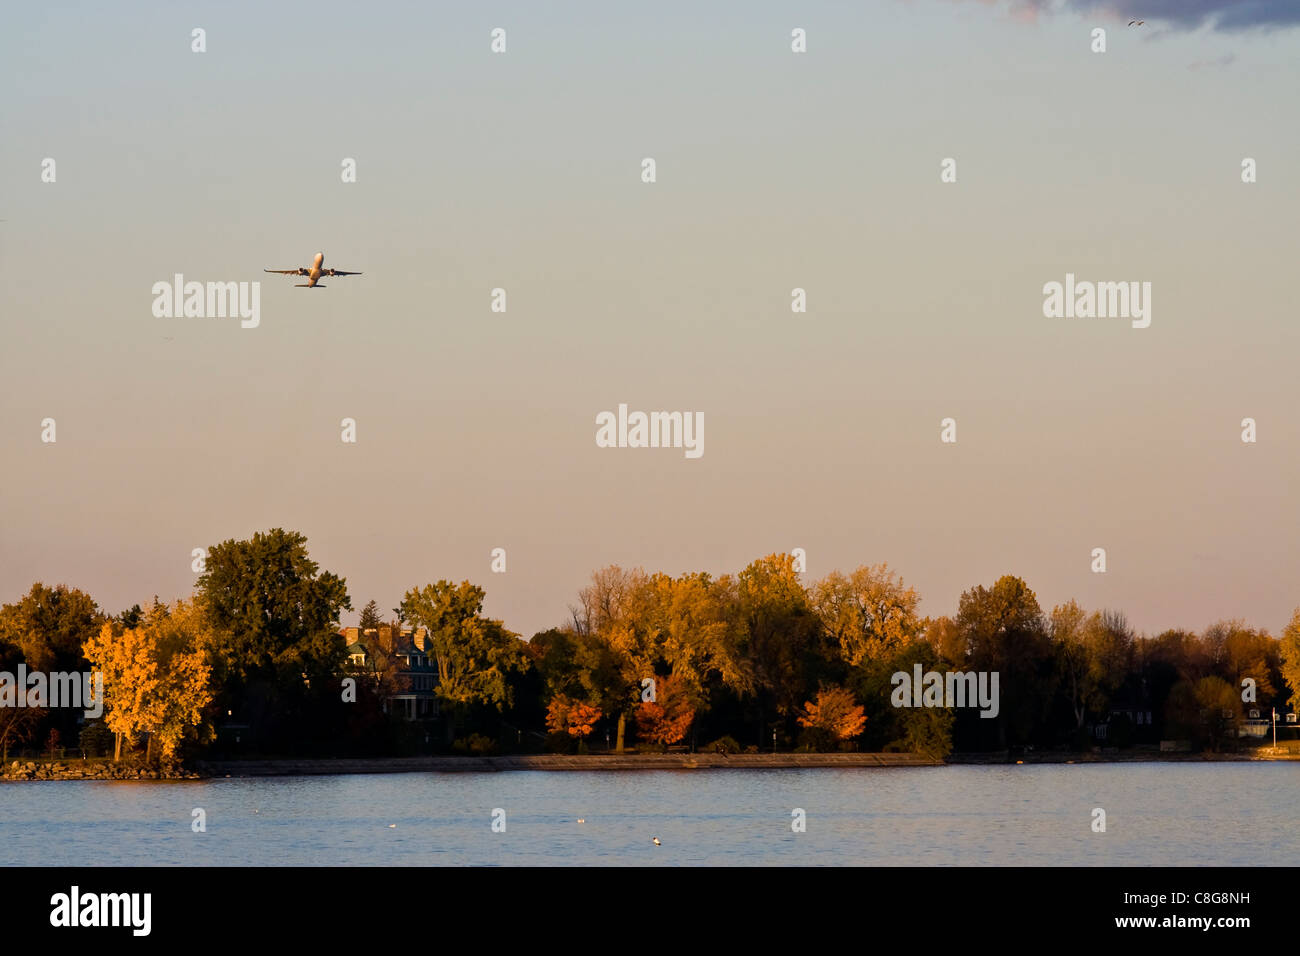 Indian summer in Montreal on Saint Lawrence river. Plane taking off from Pierre Elliot Trudeau International Airport. Stock Photo